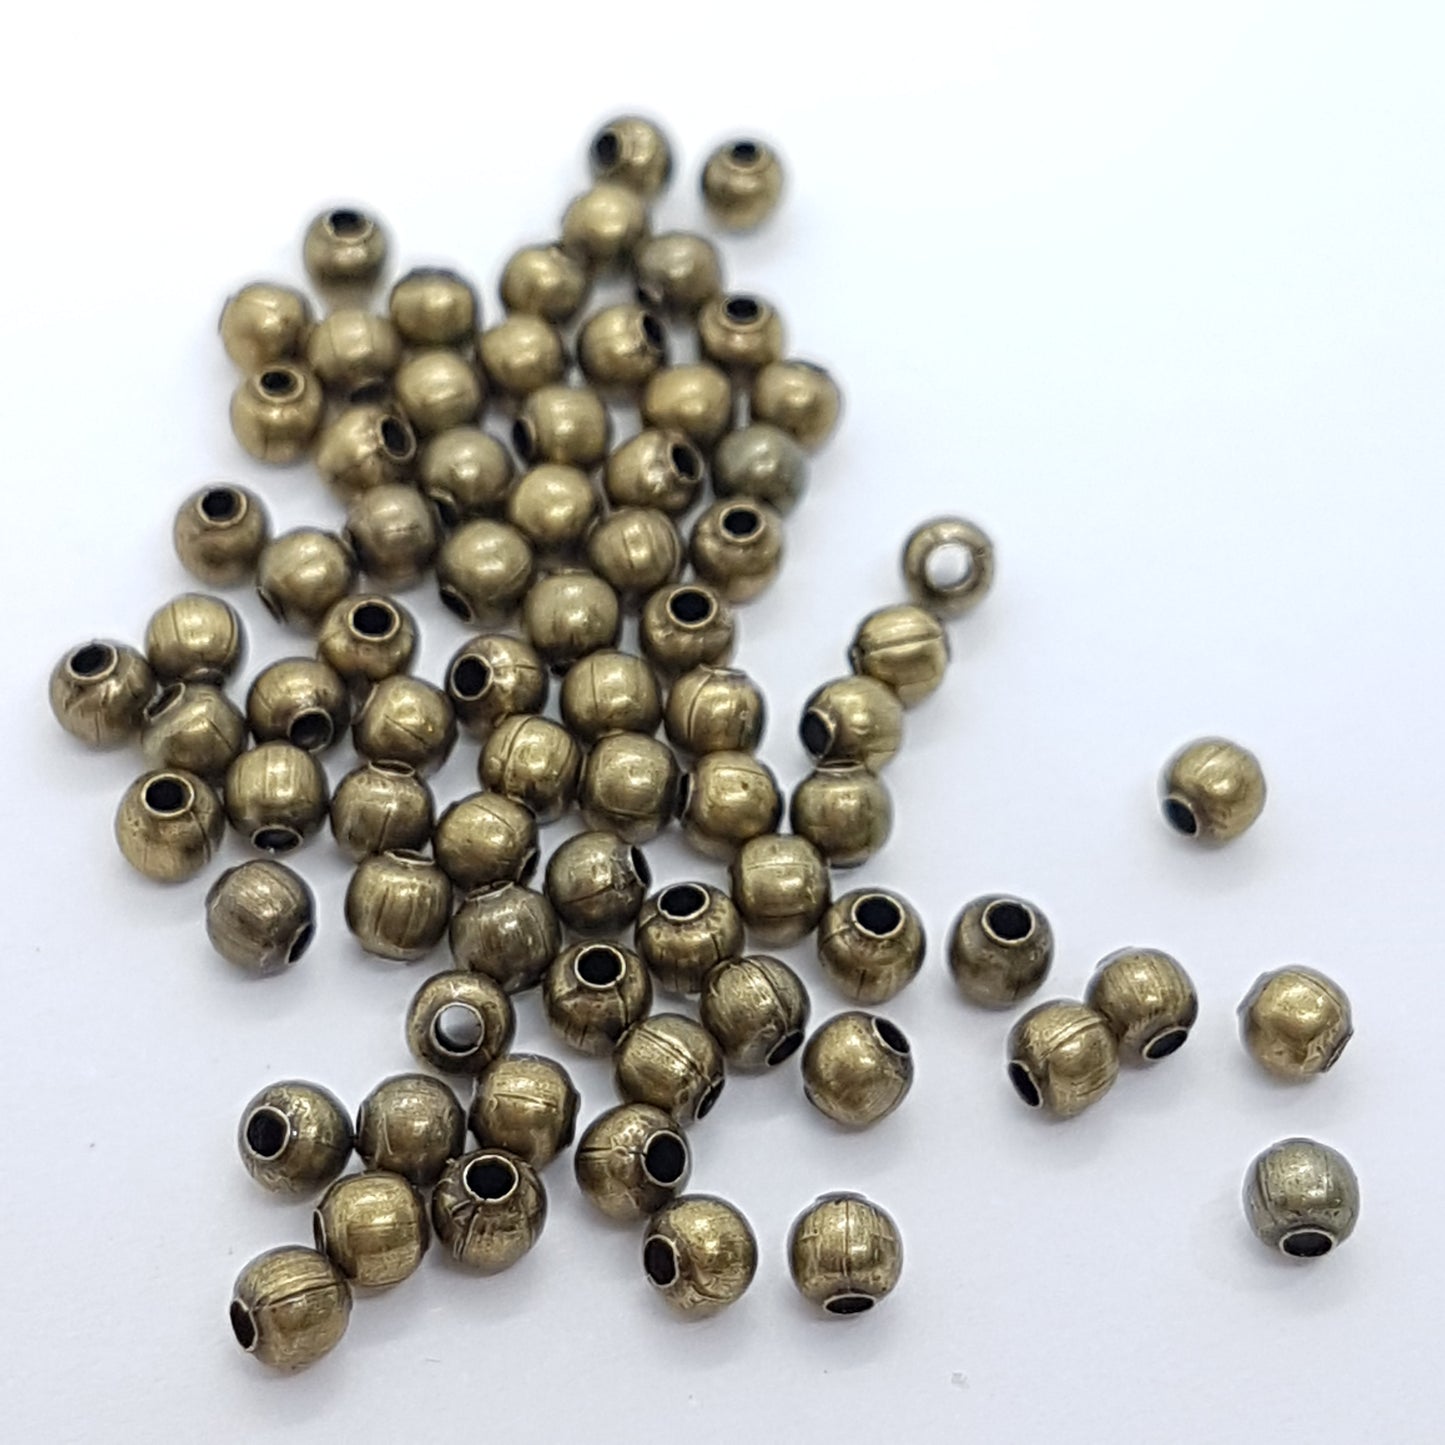 100pc Bronze Spacer Beads 3mm